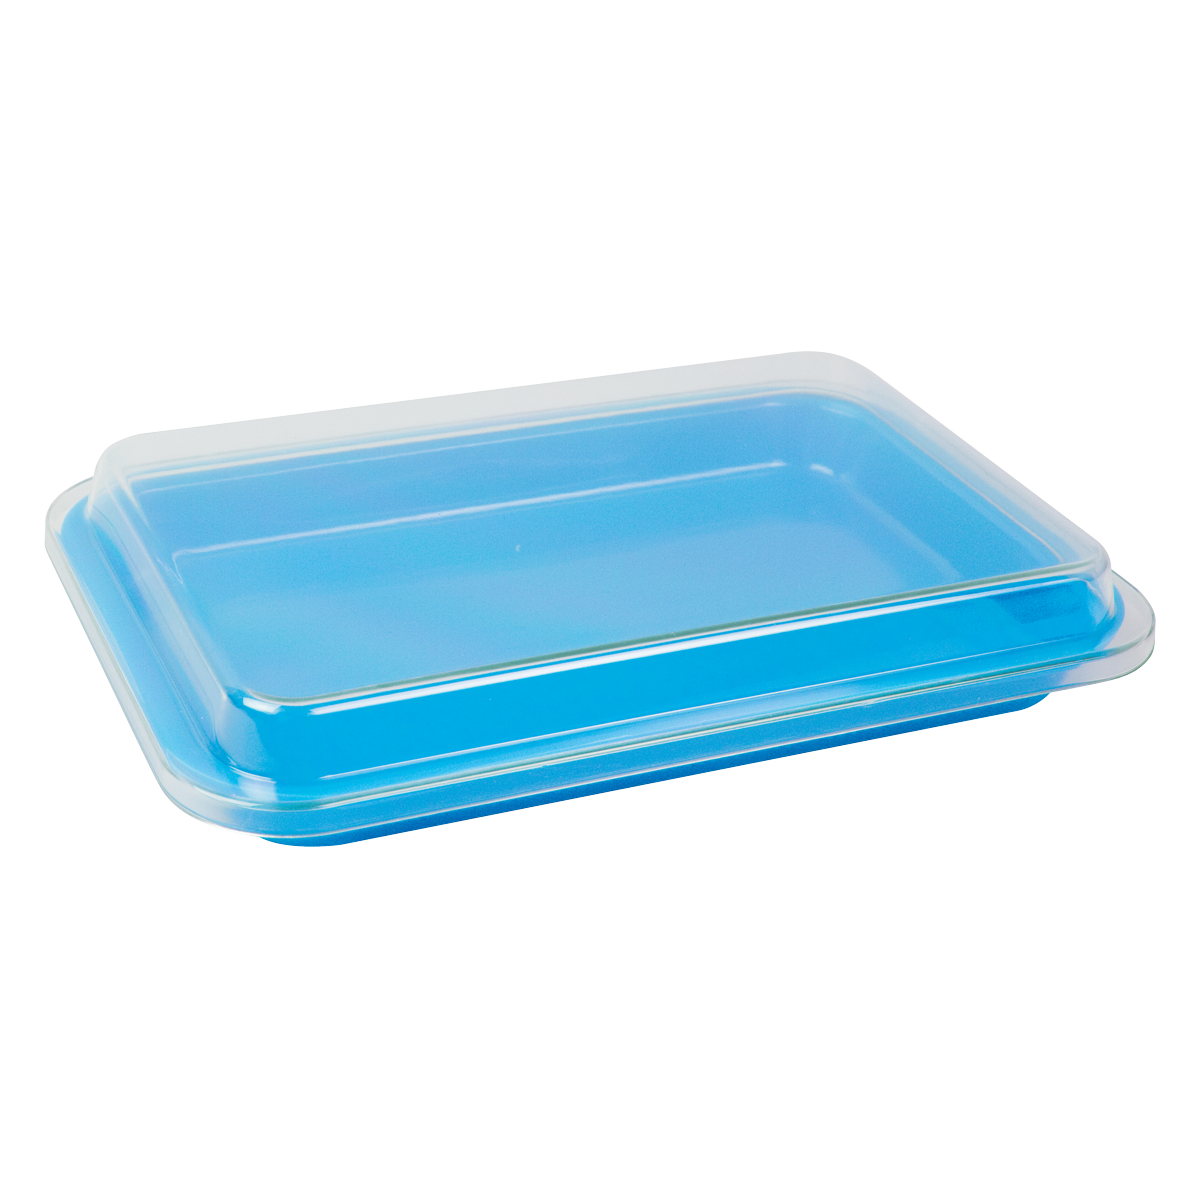 Zirc Mini Tray With Cover